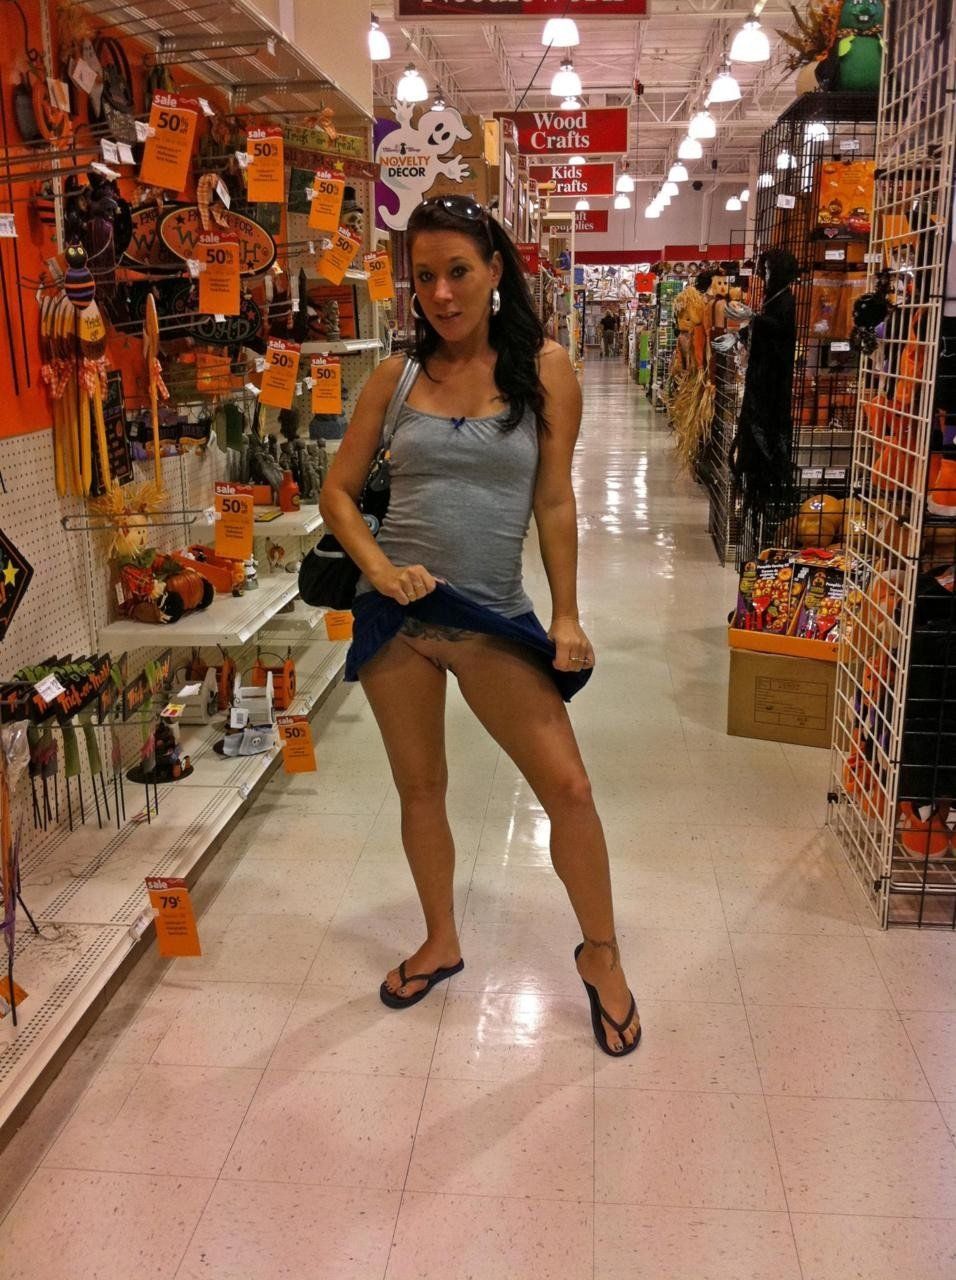 slut attention whore naked in walmart.